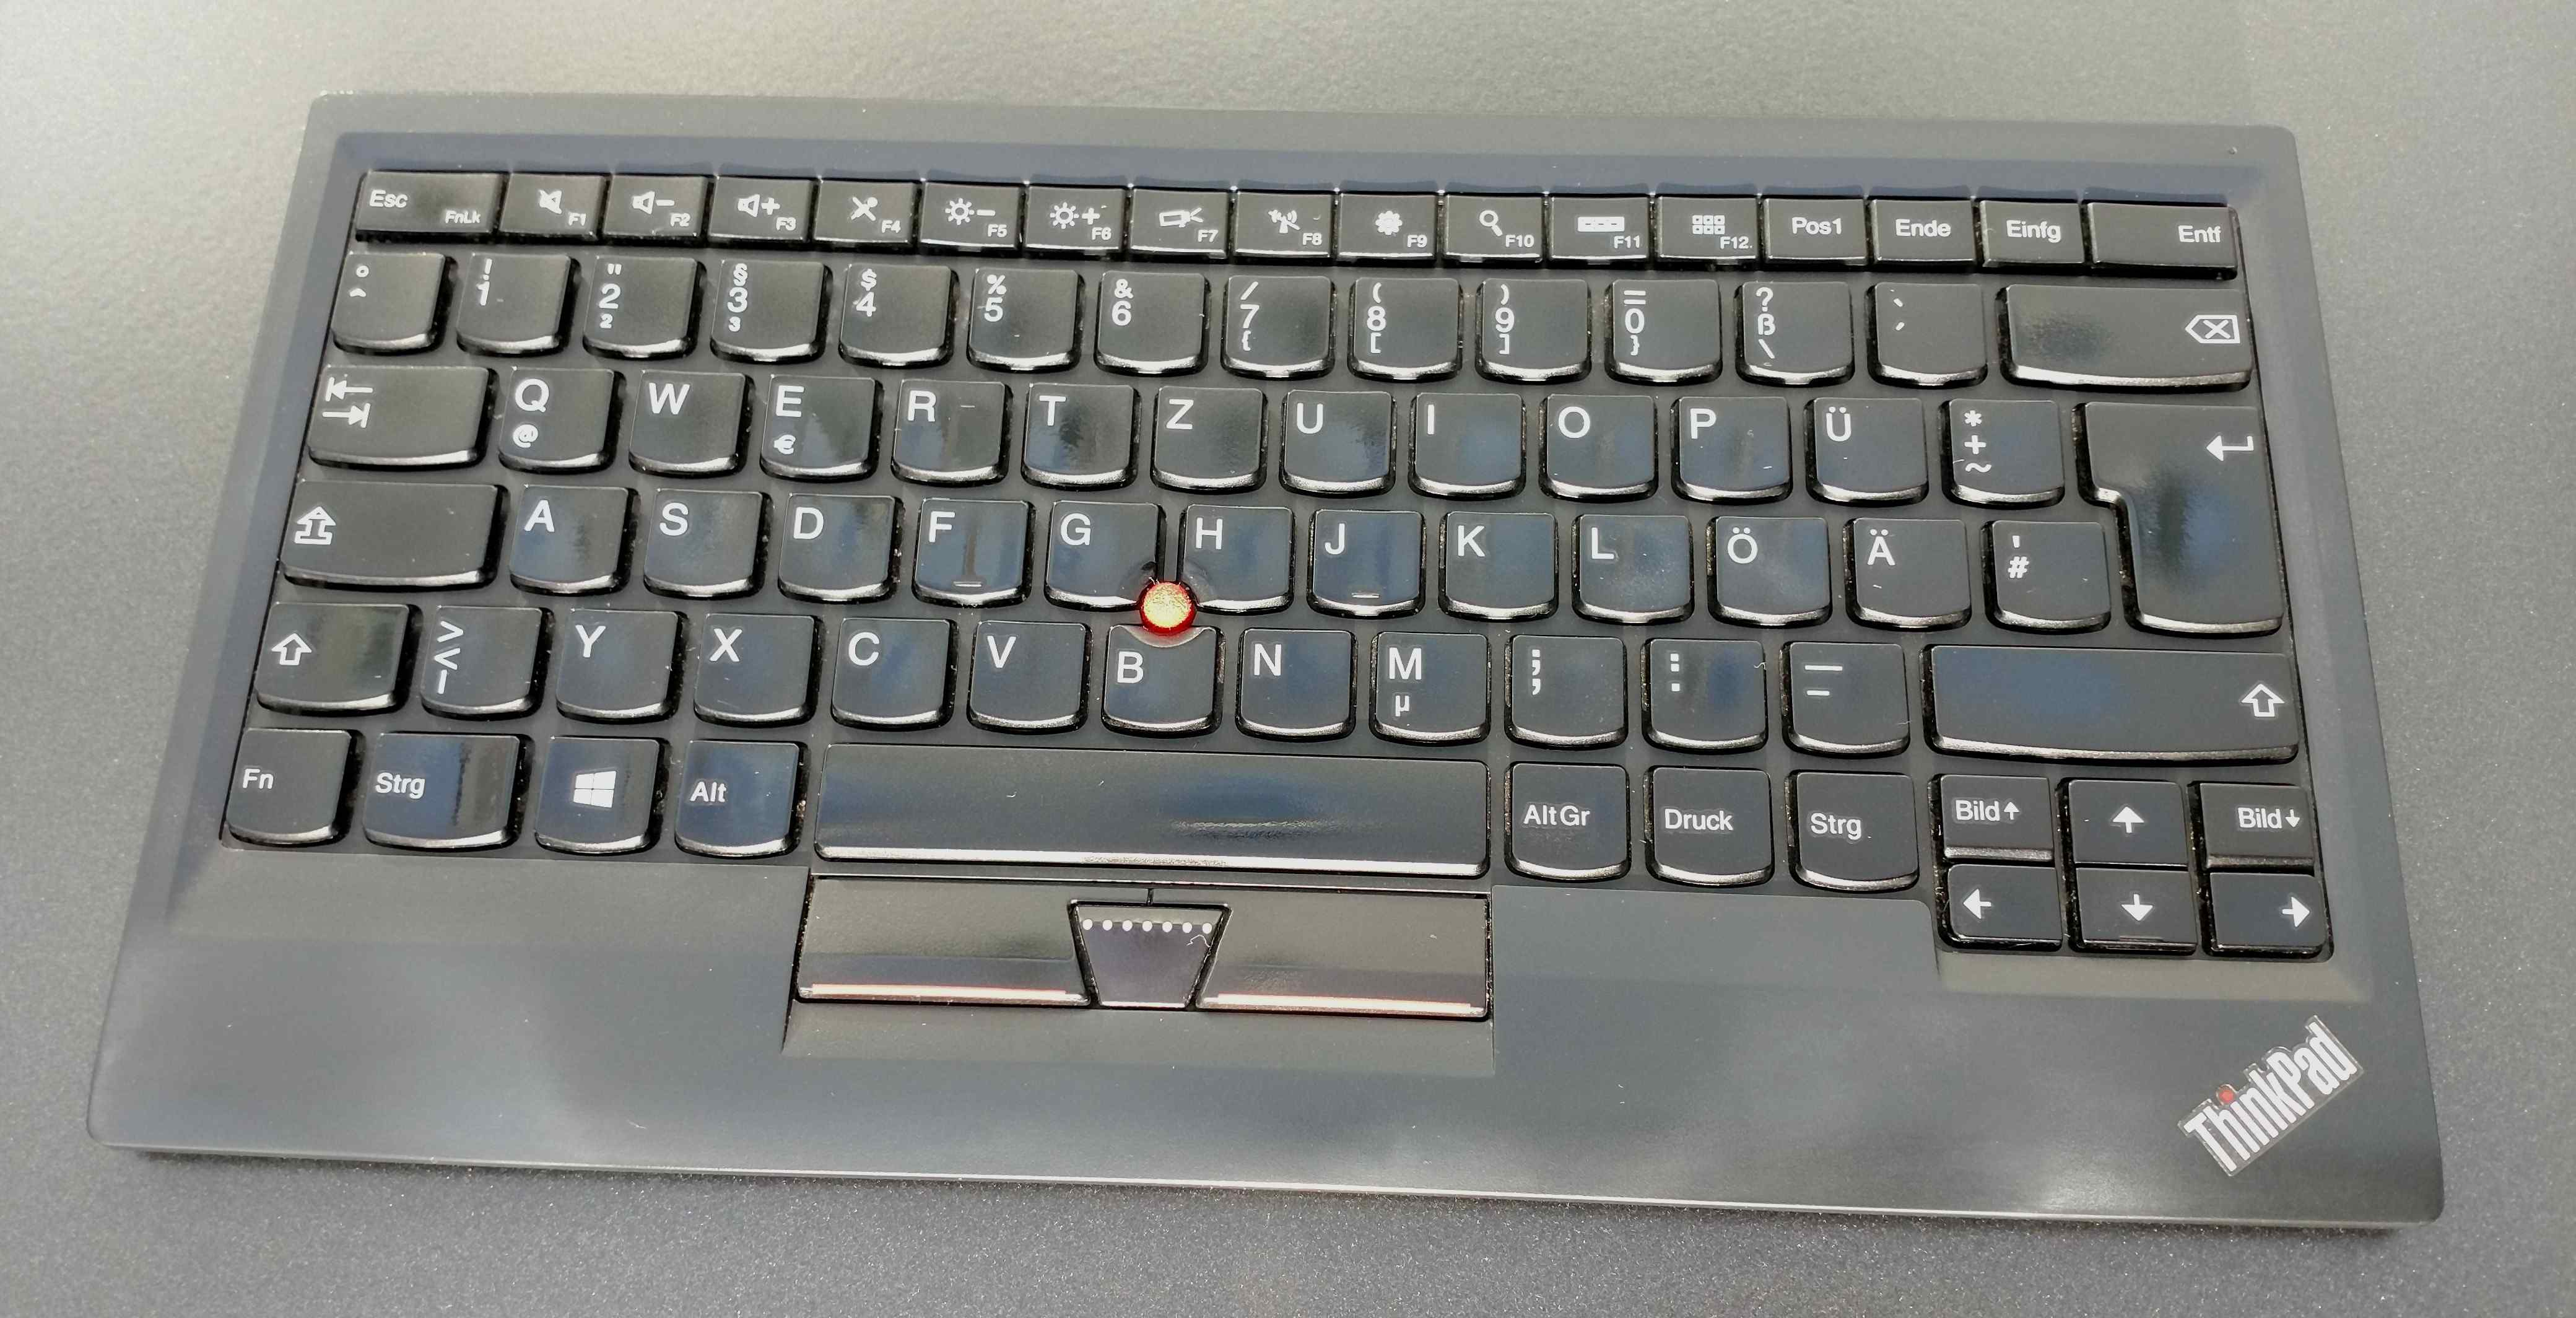 ThinkPad Compact USB Keyboard with TrackPoint